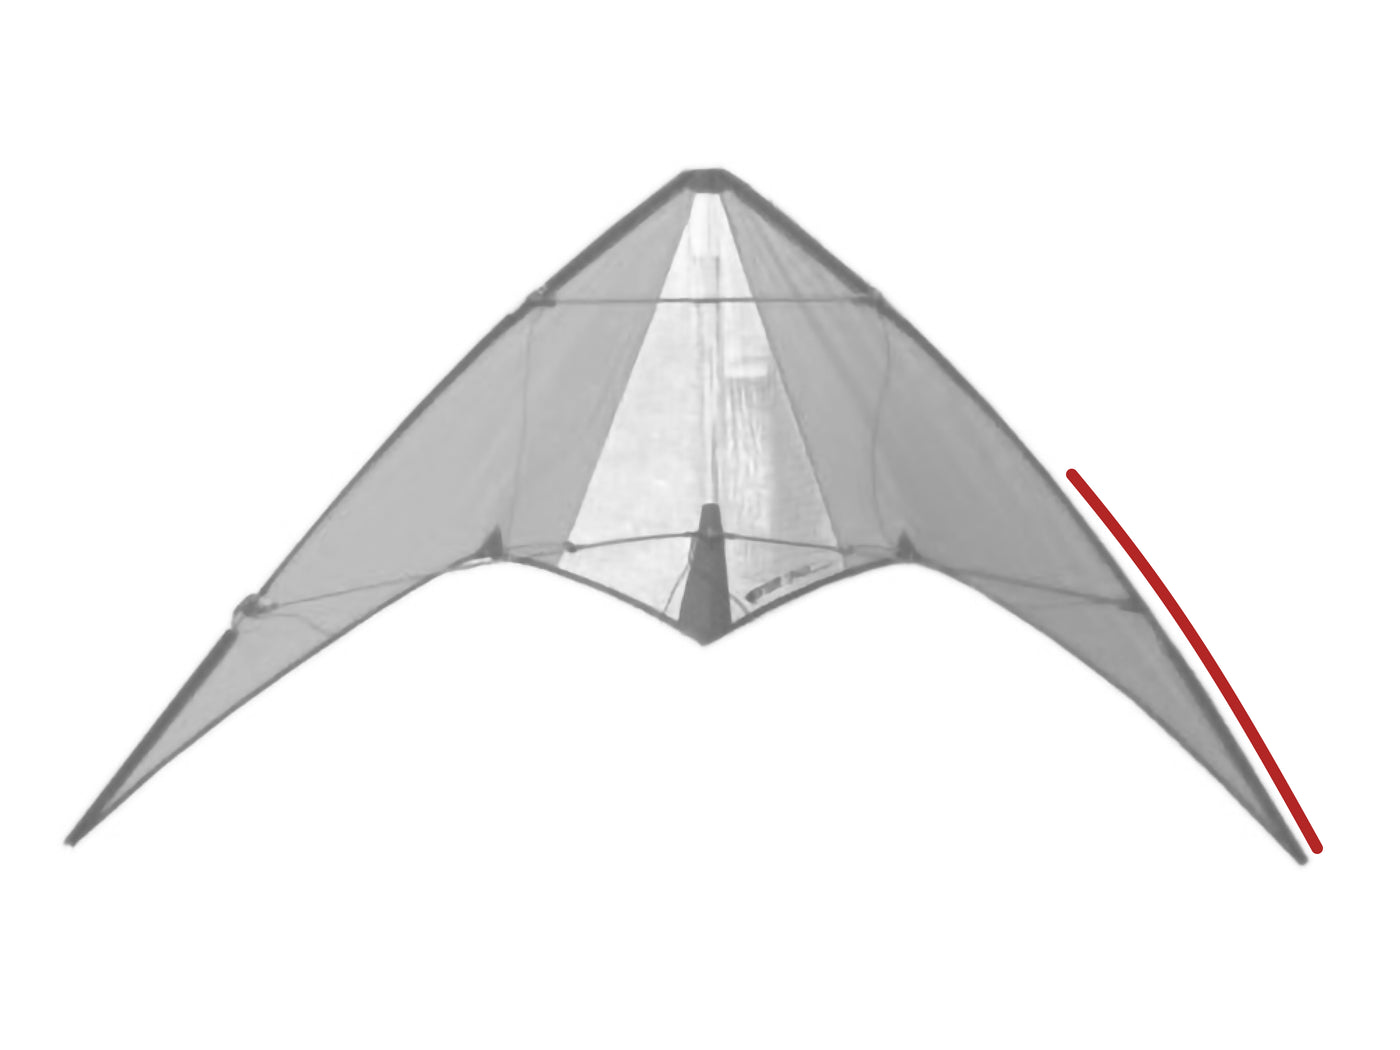 Diagram showing location of the Spark (Carbon) Lower Leading Edge on the kite.